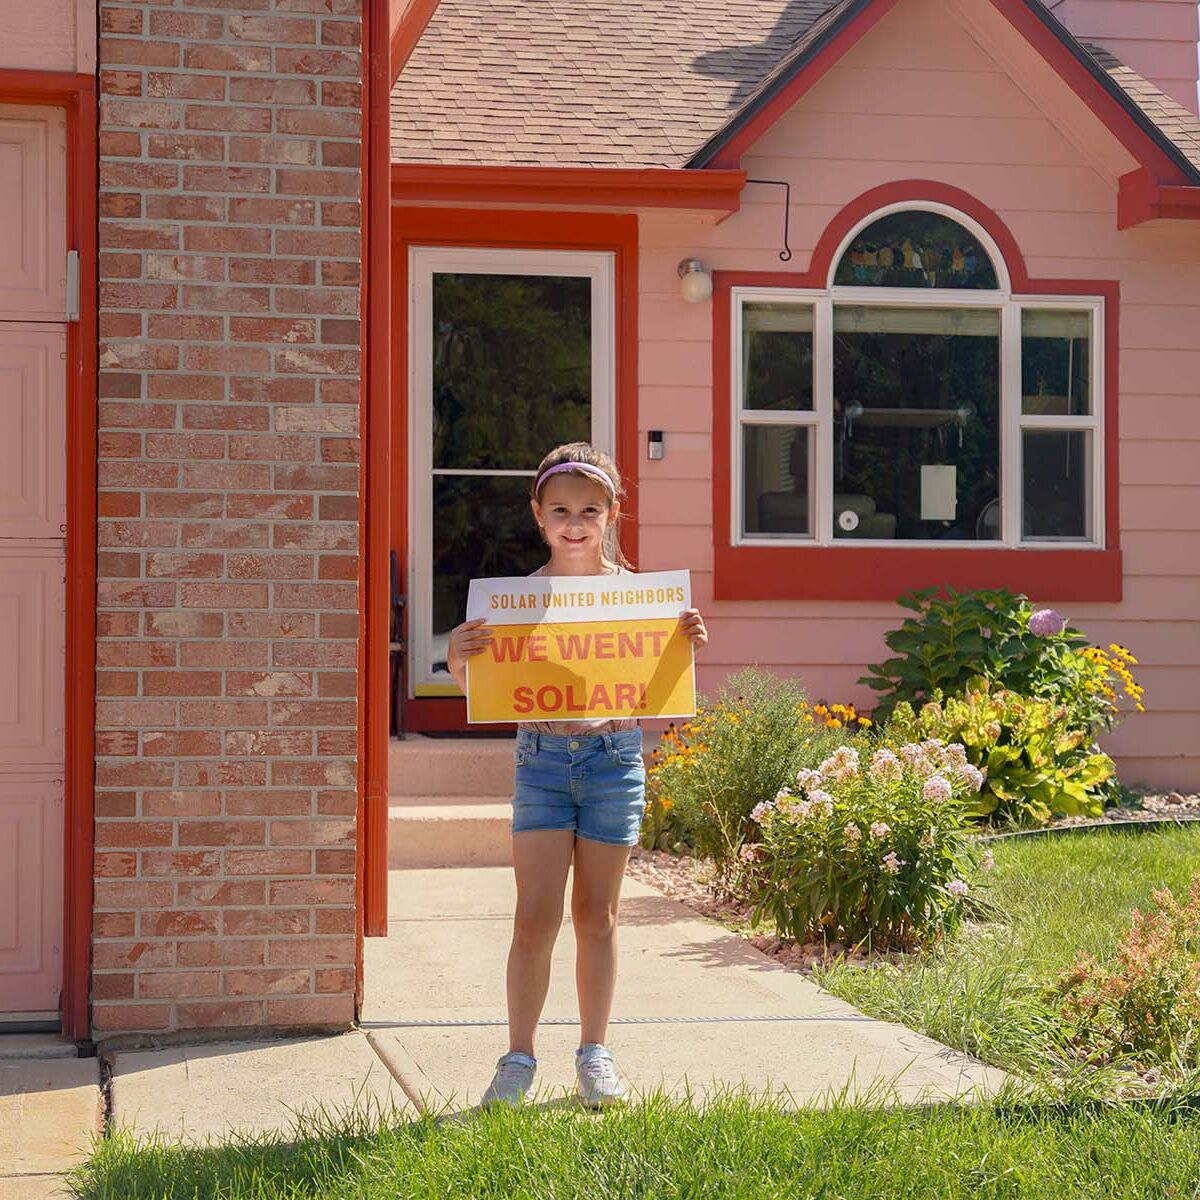 Young girl holding "We went solar" sign in front of pink house.